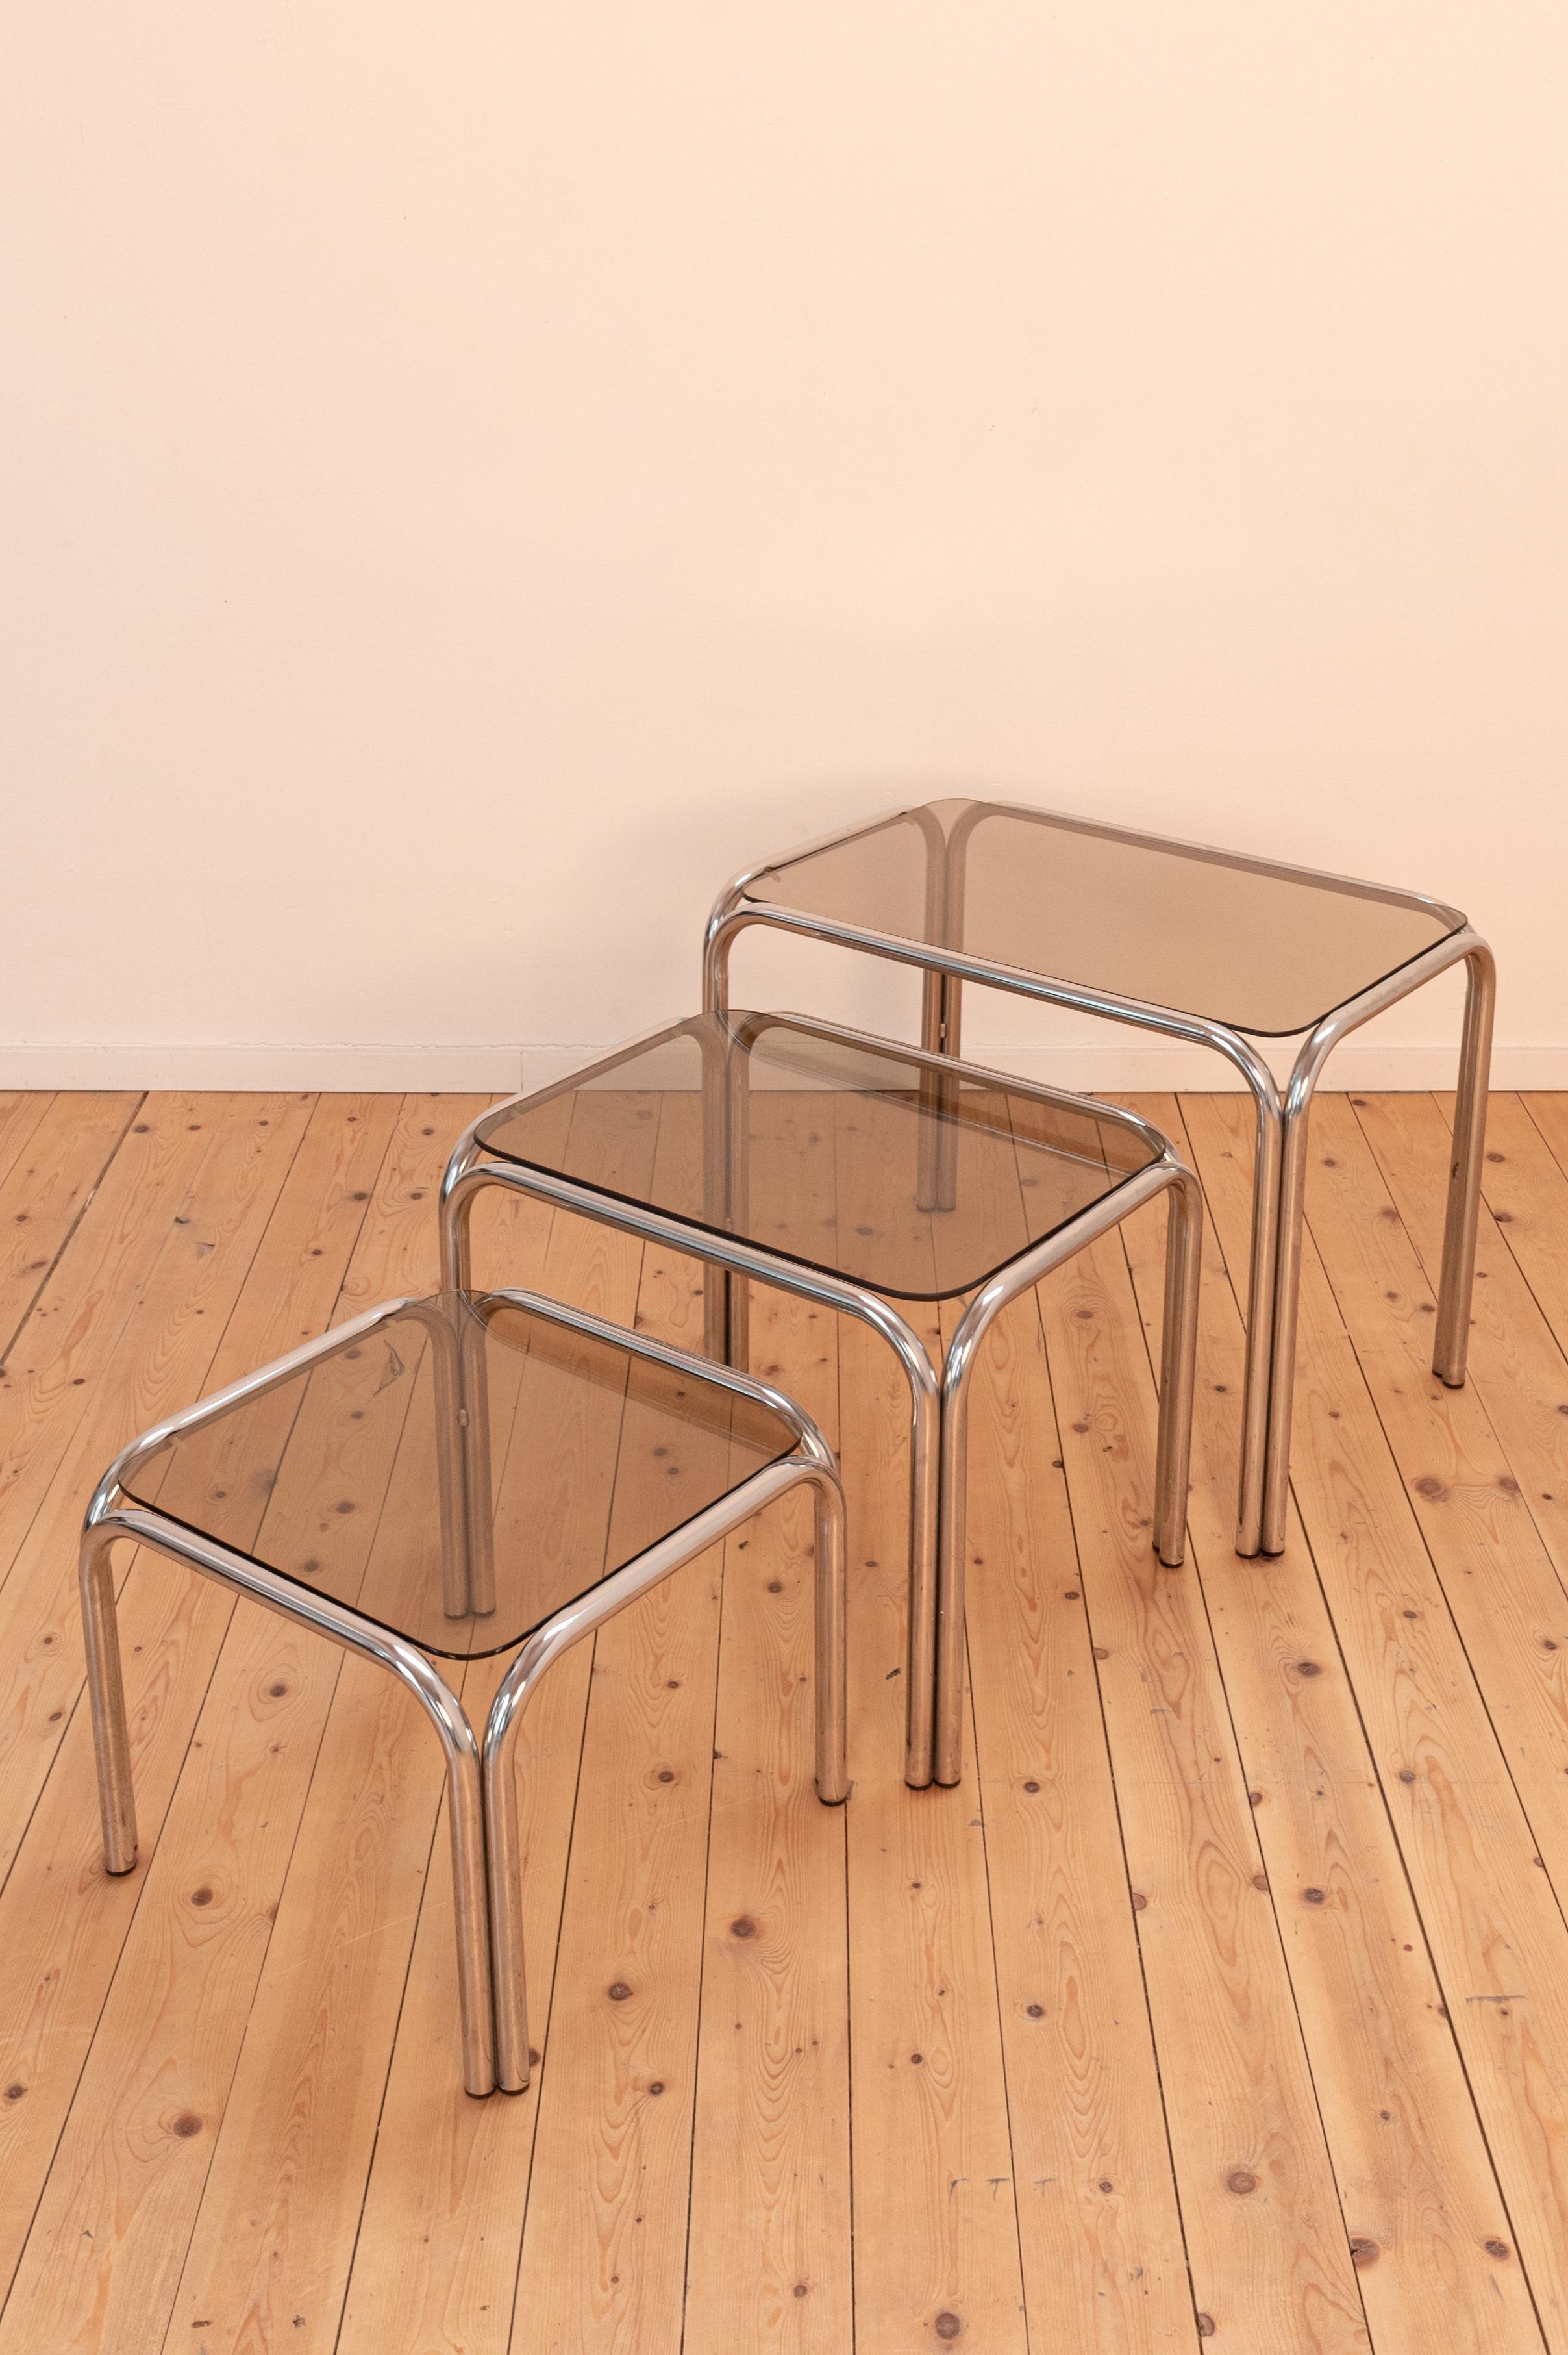 1970s set of 3 smoked glass nesting tables with tubular metal frame. Design after Milo Baughman. The dimensions mentioned are for the largest table. 
The price is for the set of 3 tables